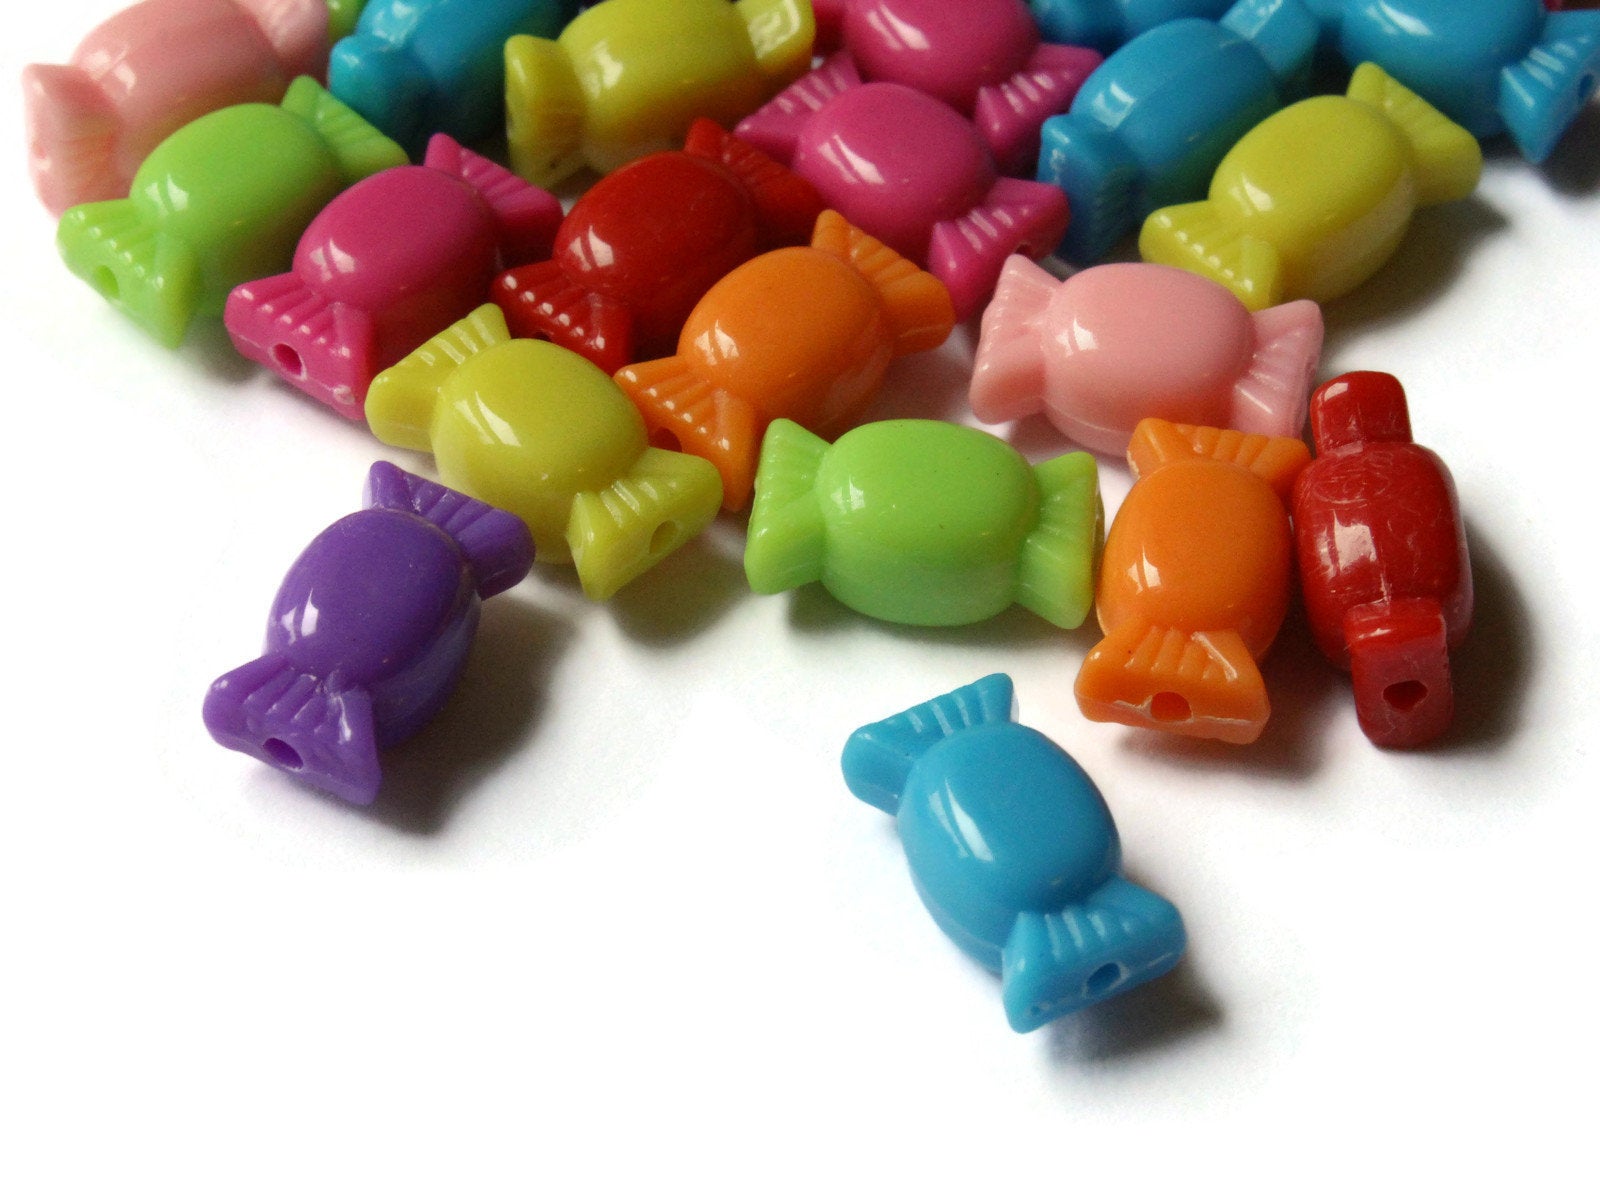 40 15.5mm Mixed Color Hard Candy Beads Rainbow Colored Plastic Beads by Smileyboy | Michaels